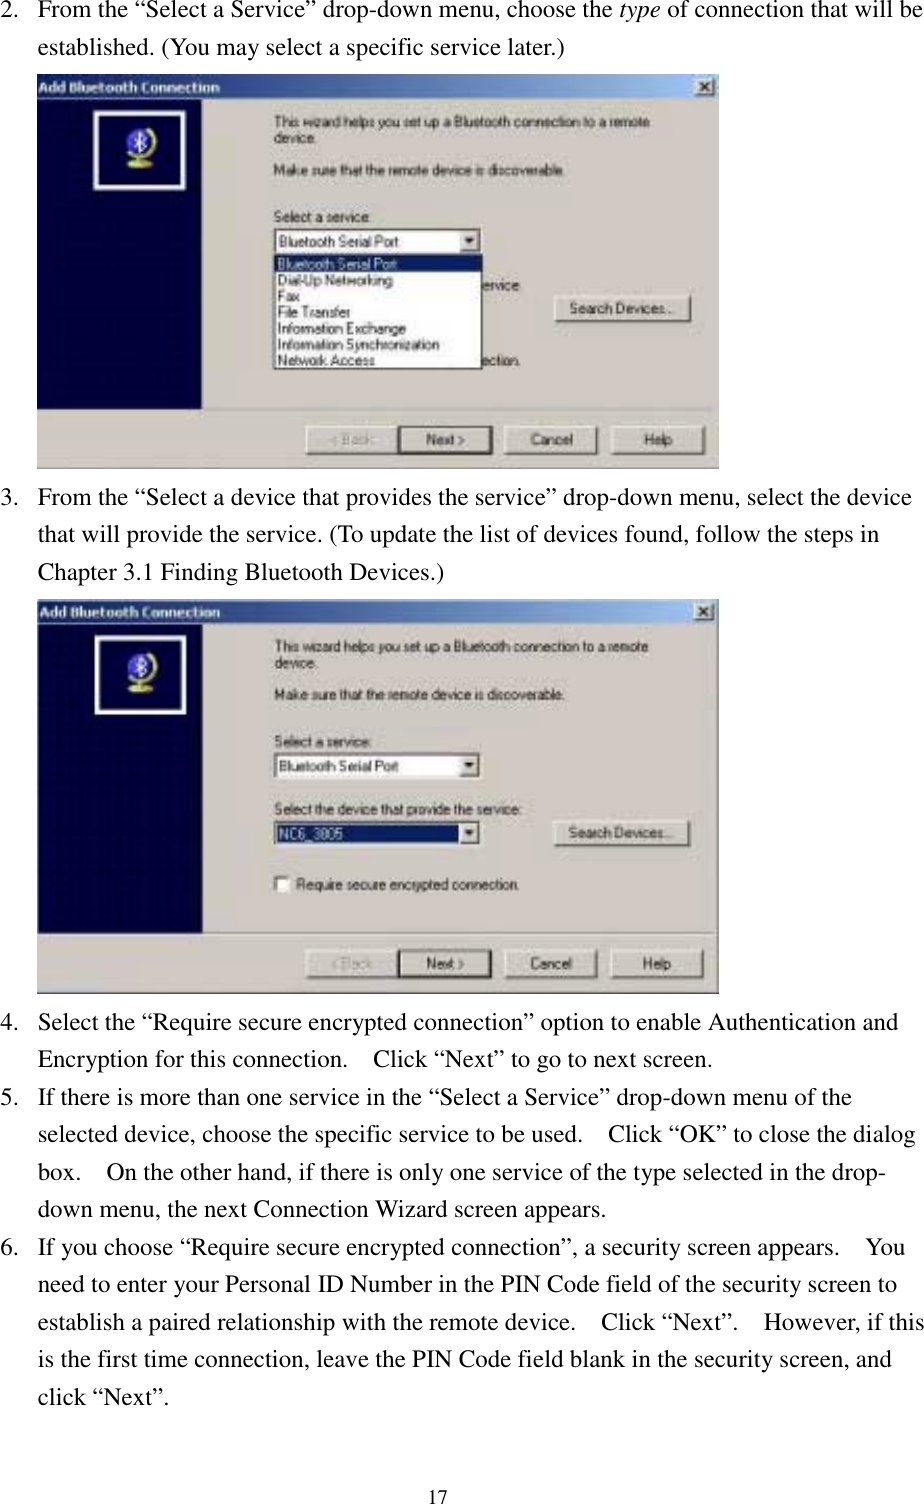 172. From the “Select a Service” drop-down menu, choose the type of connection that will beestablished. (You may select a specific service later.)3. From the “Select a device that provides the service” drop-down menu, select the devicethat will provide the service. (To update the list of devices found, follow the steps inChapter 3.1 Finding Bluetooth Devices.)4. Select the “Require secure encrypted connection” option to enable Authentication andEncryption for this connection.    Click “Next” to go to next screen.5. If there is more than one service in the “Select a Service” drop-down menu of theselected device, choose the specific service to be used.    Click “OK” to close the dialogbox.    On the other hand, if there is only one service of the type selected in the drop-down menu, the next Connection Wizard screen appears.6. If you choose “Require secure encrypted connection”, a security screen appears.    Youneed to enter your Personal ID Number in the PIN Code field of the security screen toestablish a paired relationship with the remote device.    Click “Next”.    However, if thisis the first time connection, leave the PIN Code field blank in the security screen, andclick “Next”.